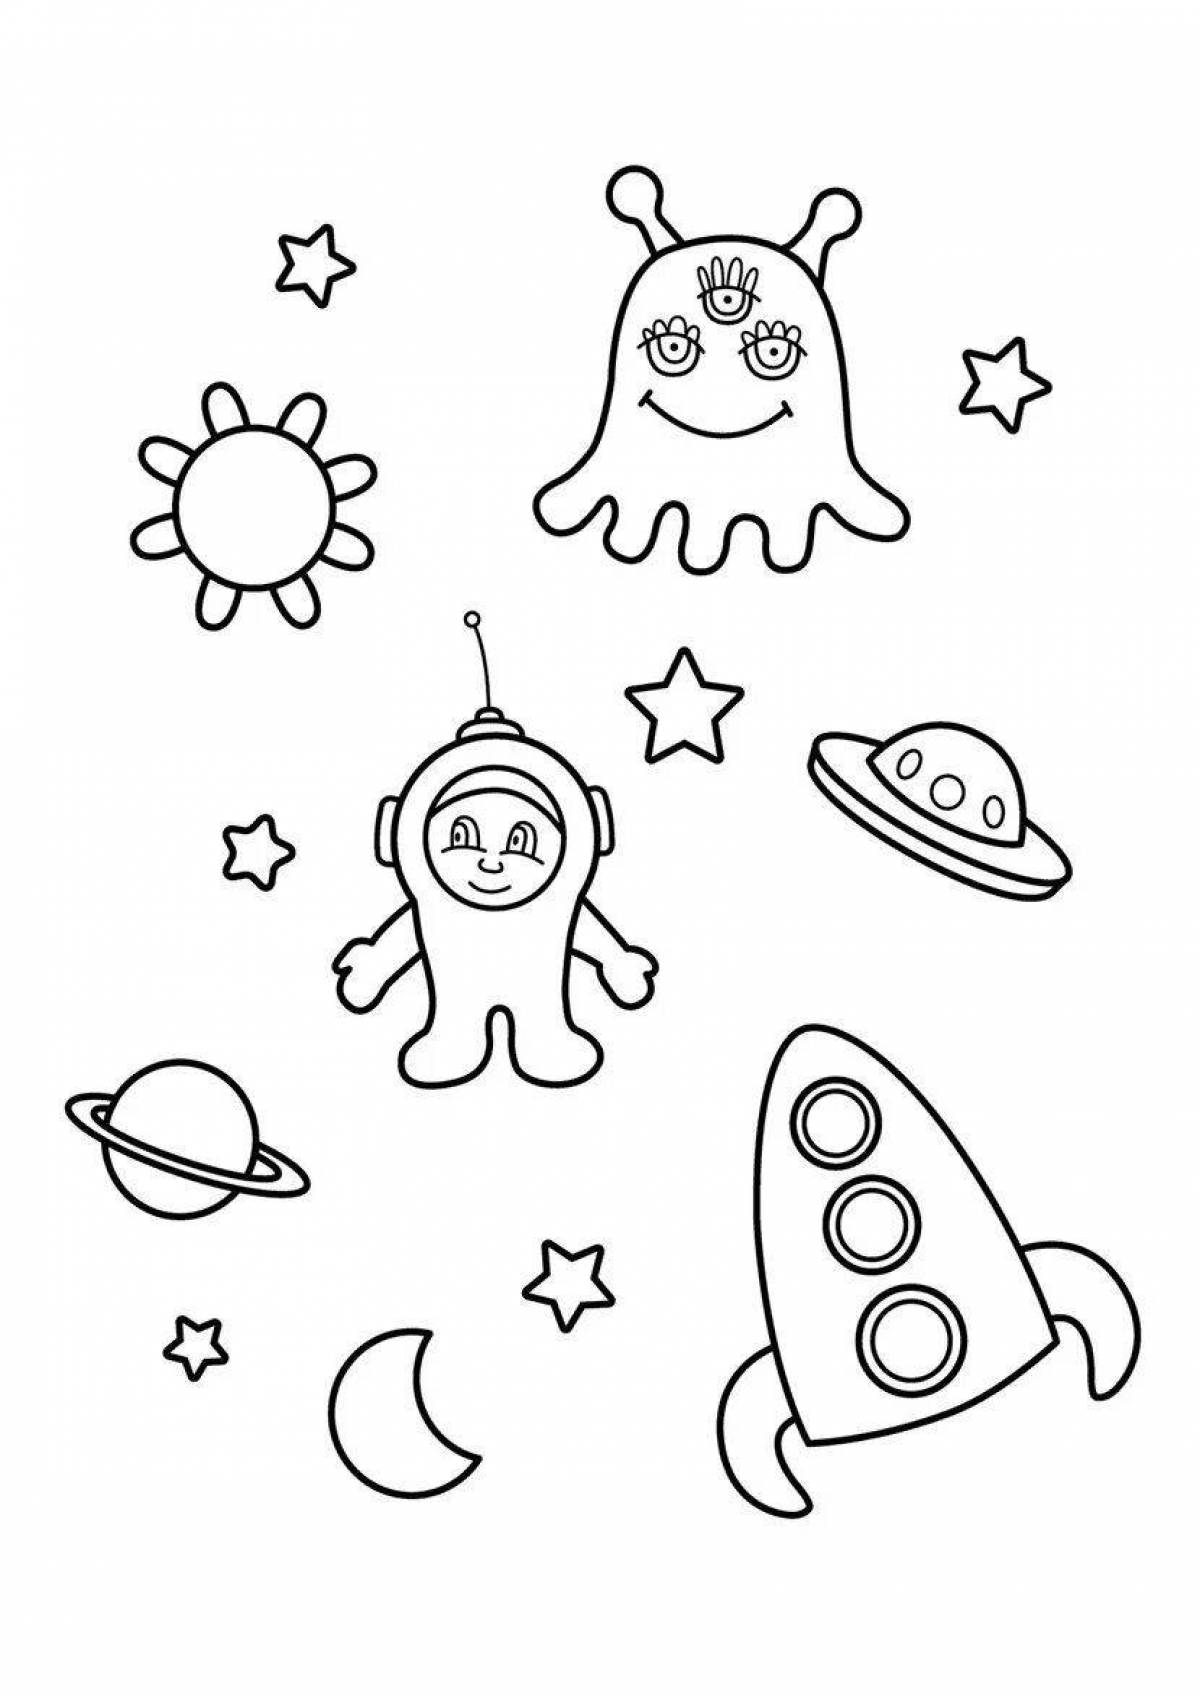 A wonderful space coloring book for kids